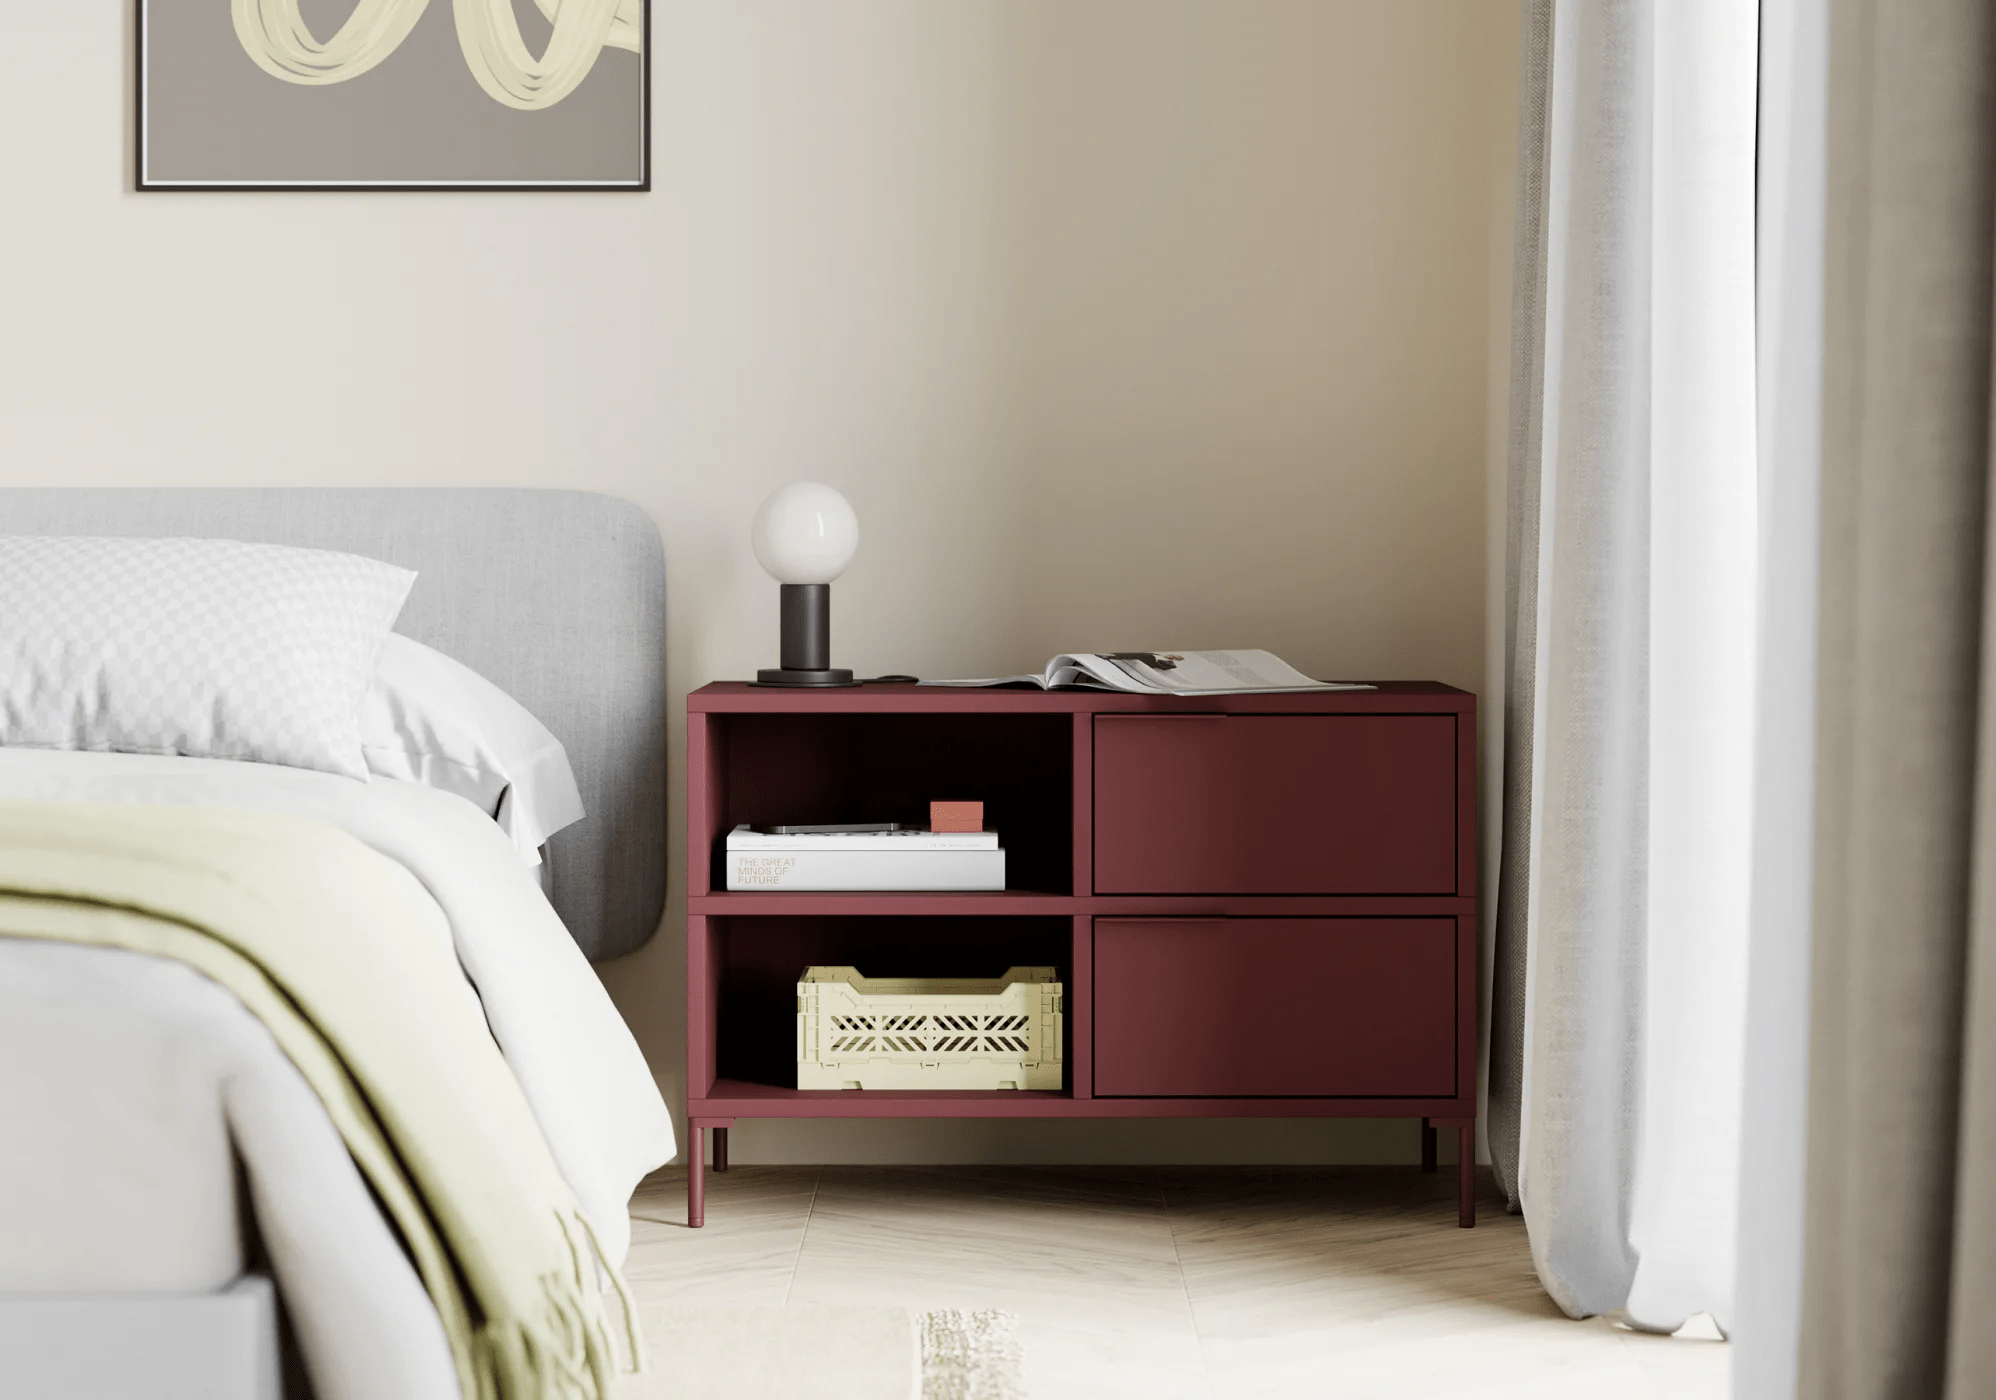 Large Burgundy Red Bedside Table with Drawers, Backpanels and Legs - 78x53x40cm 3